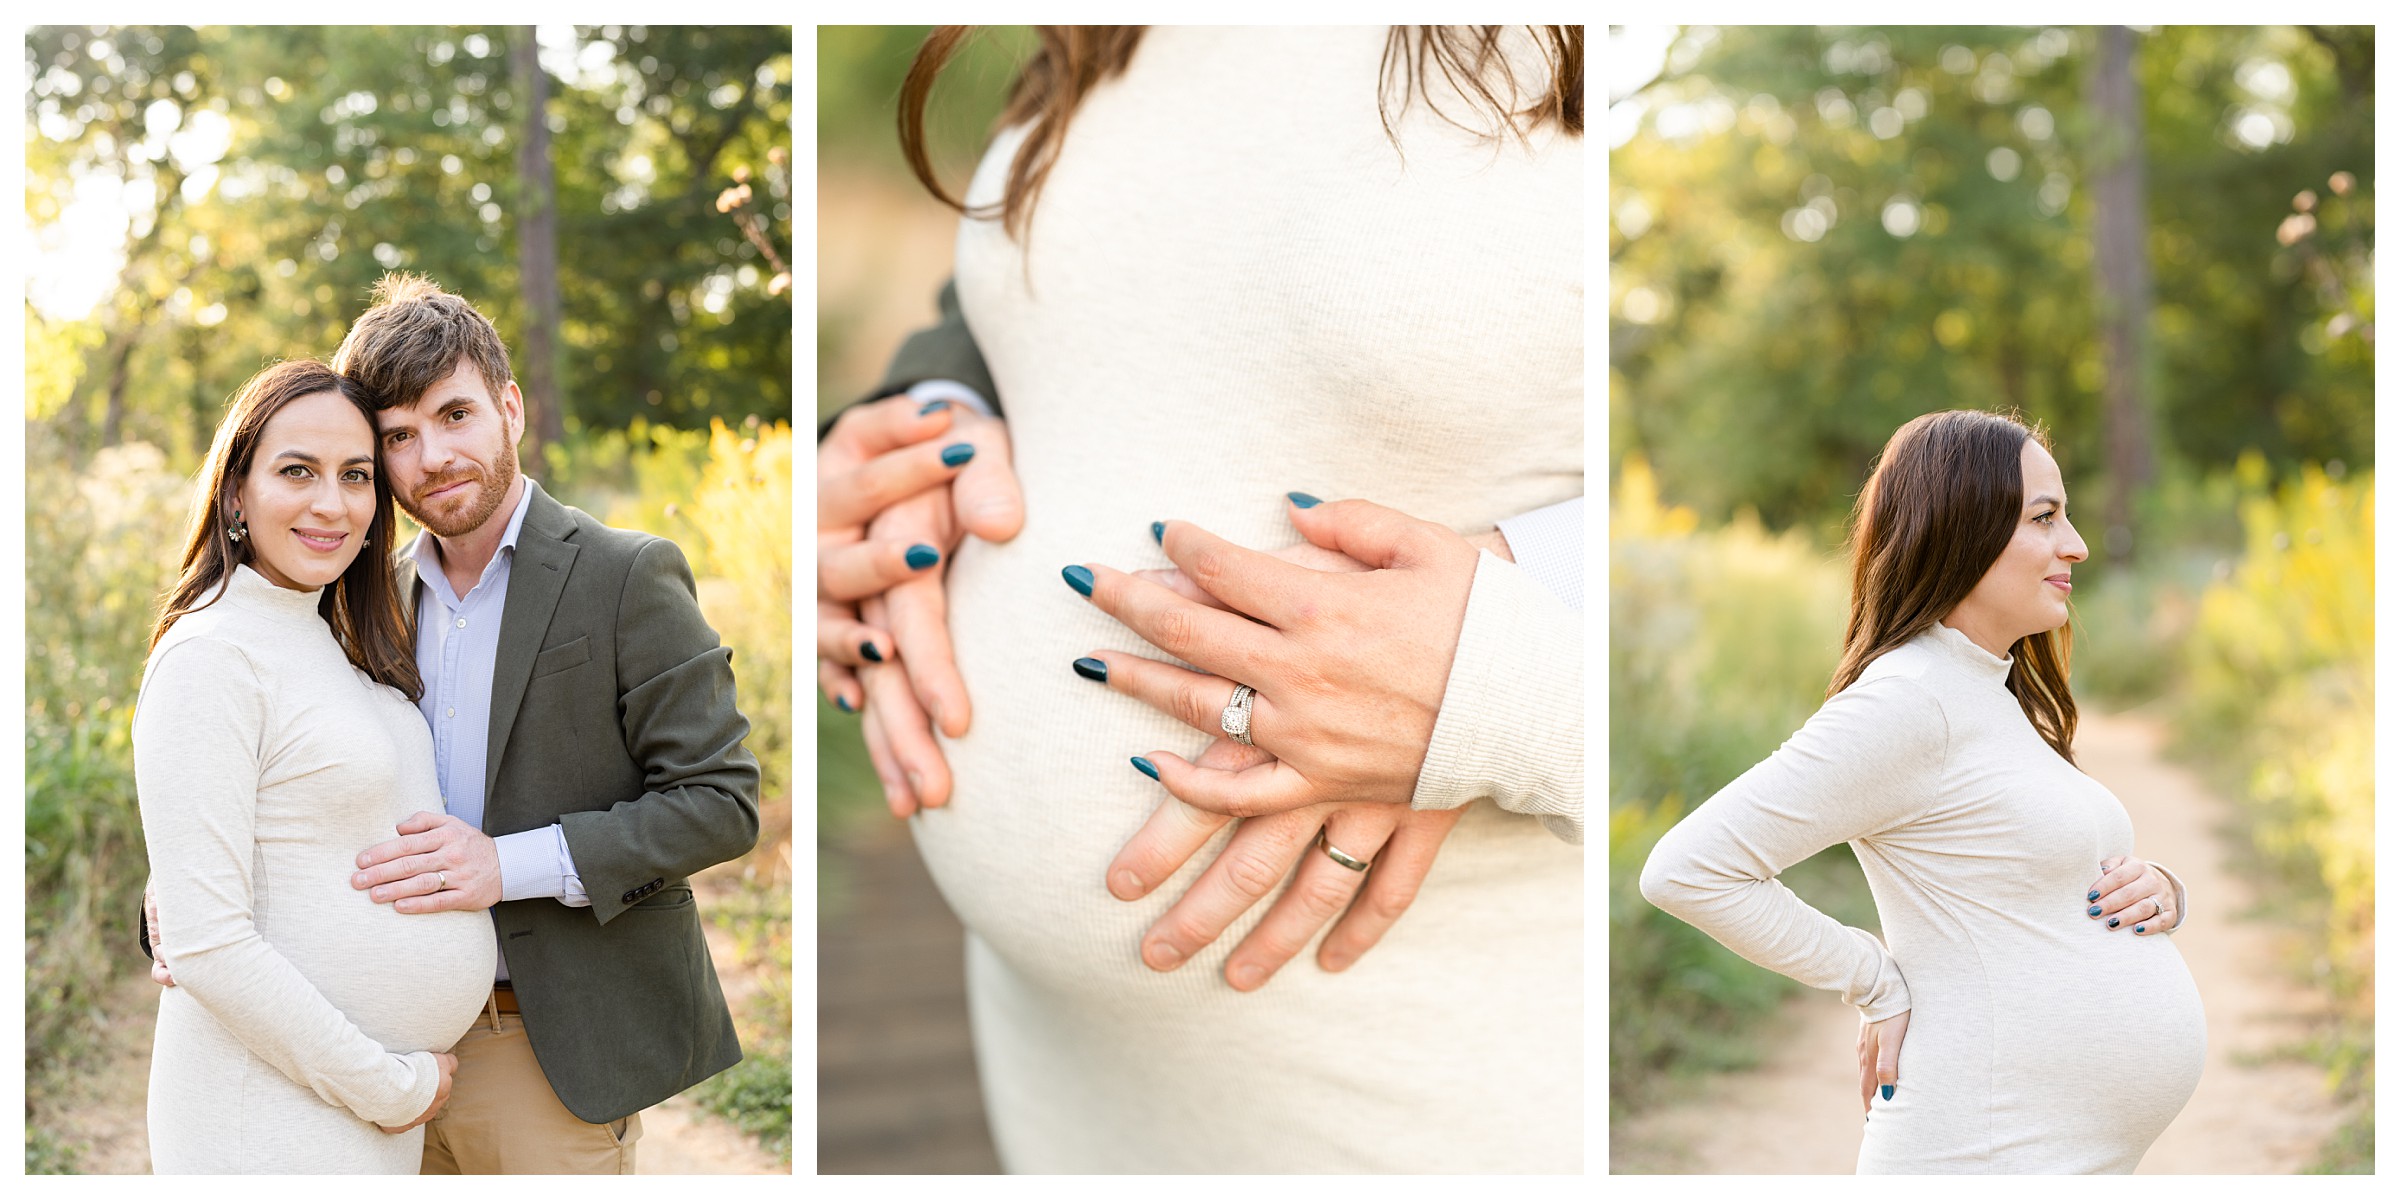 First image is of husband and wife standing with hand on pregnant belly on a gravel path surrounded by nature at the Houston Arboretum, second image is close up of all hands on belly and third image is of wife looking away with her hand on belly and smiling